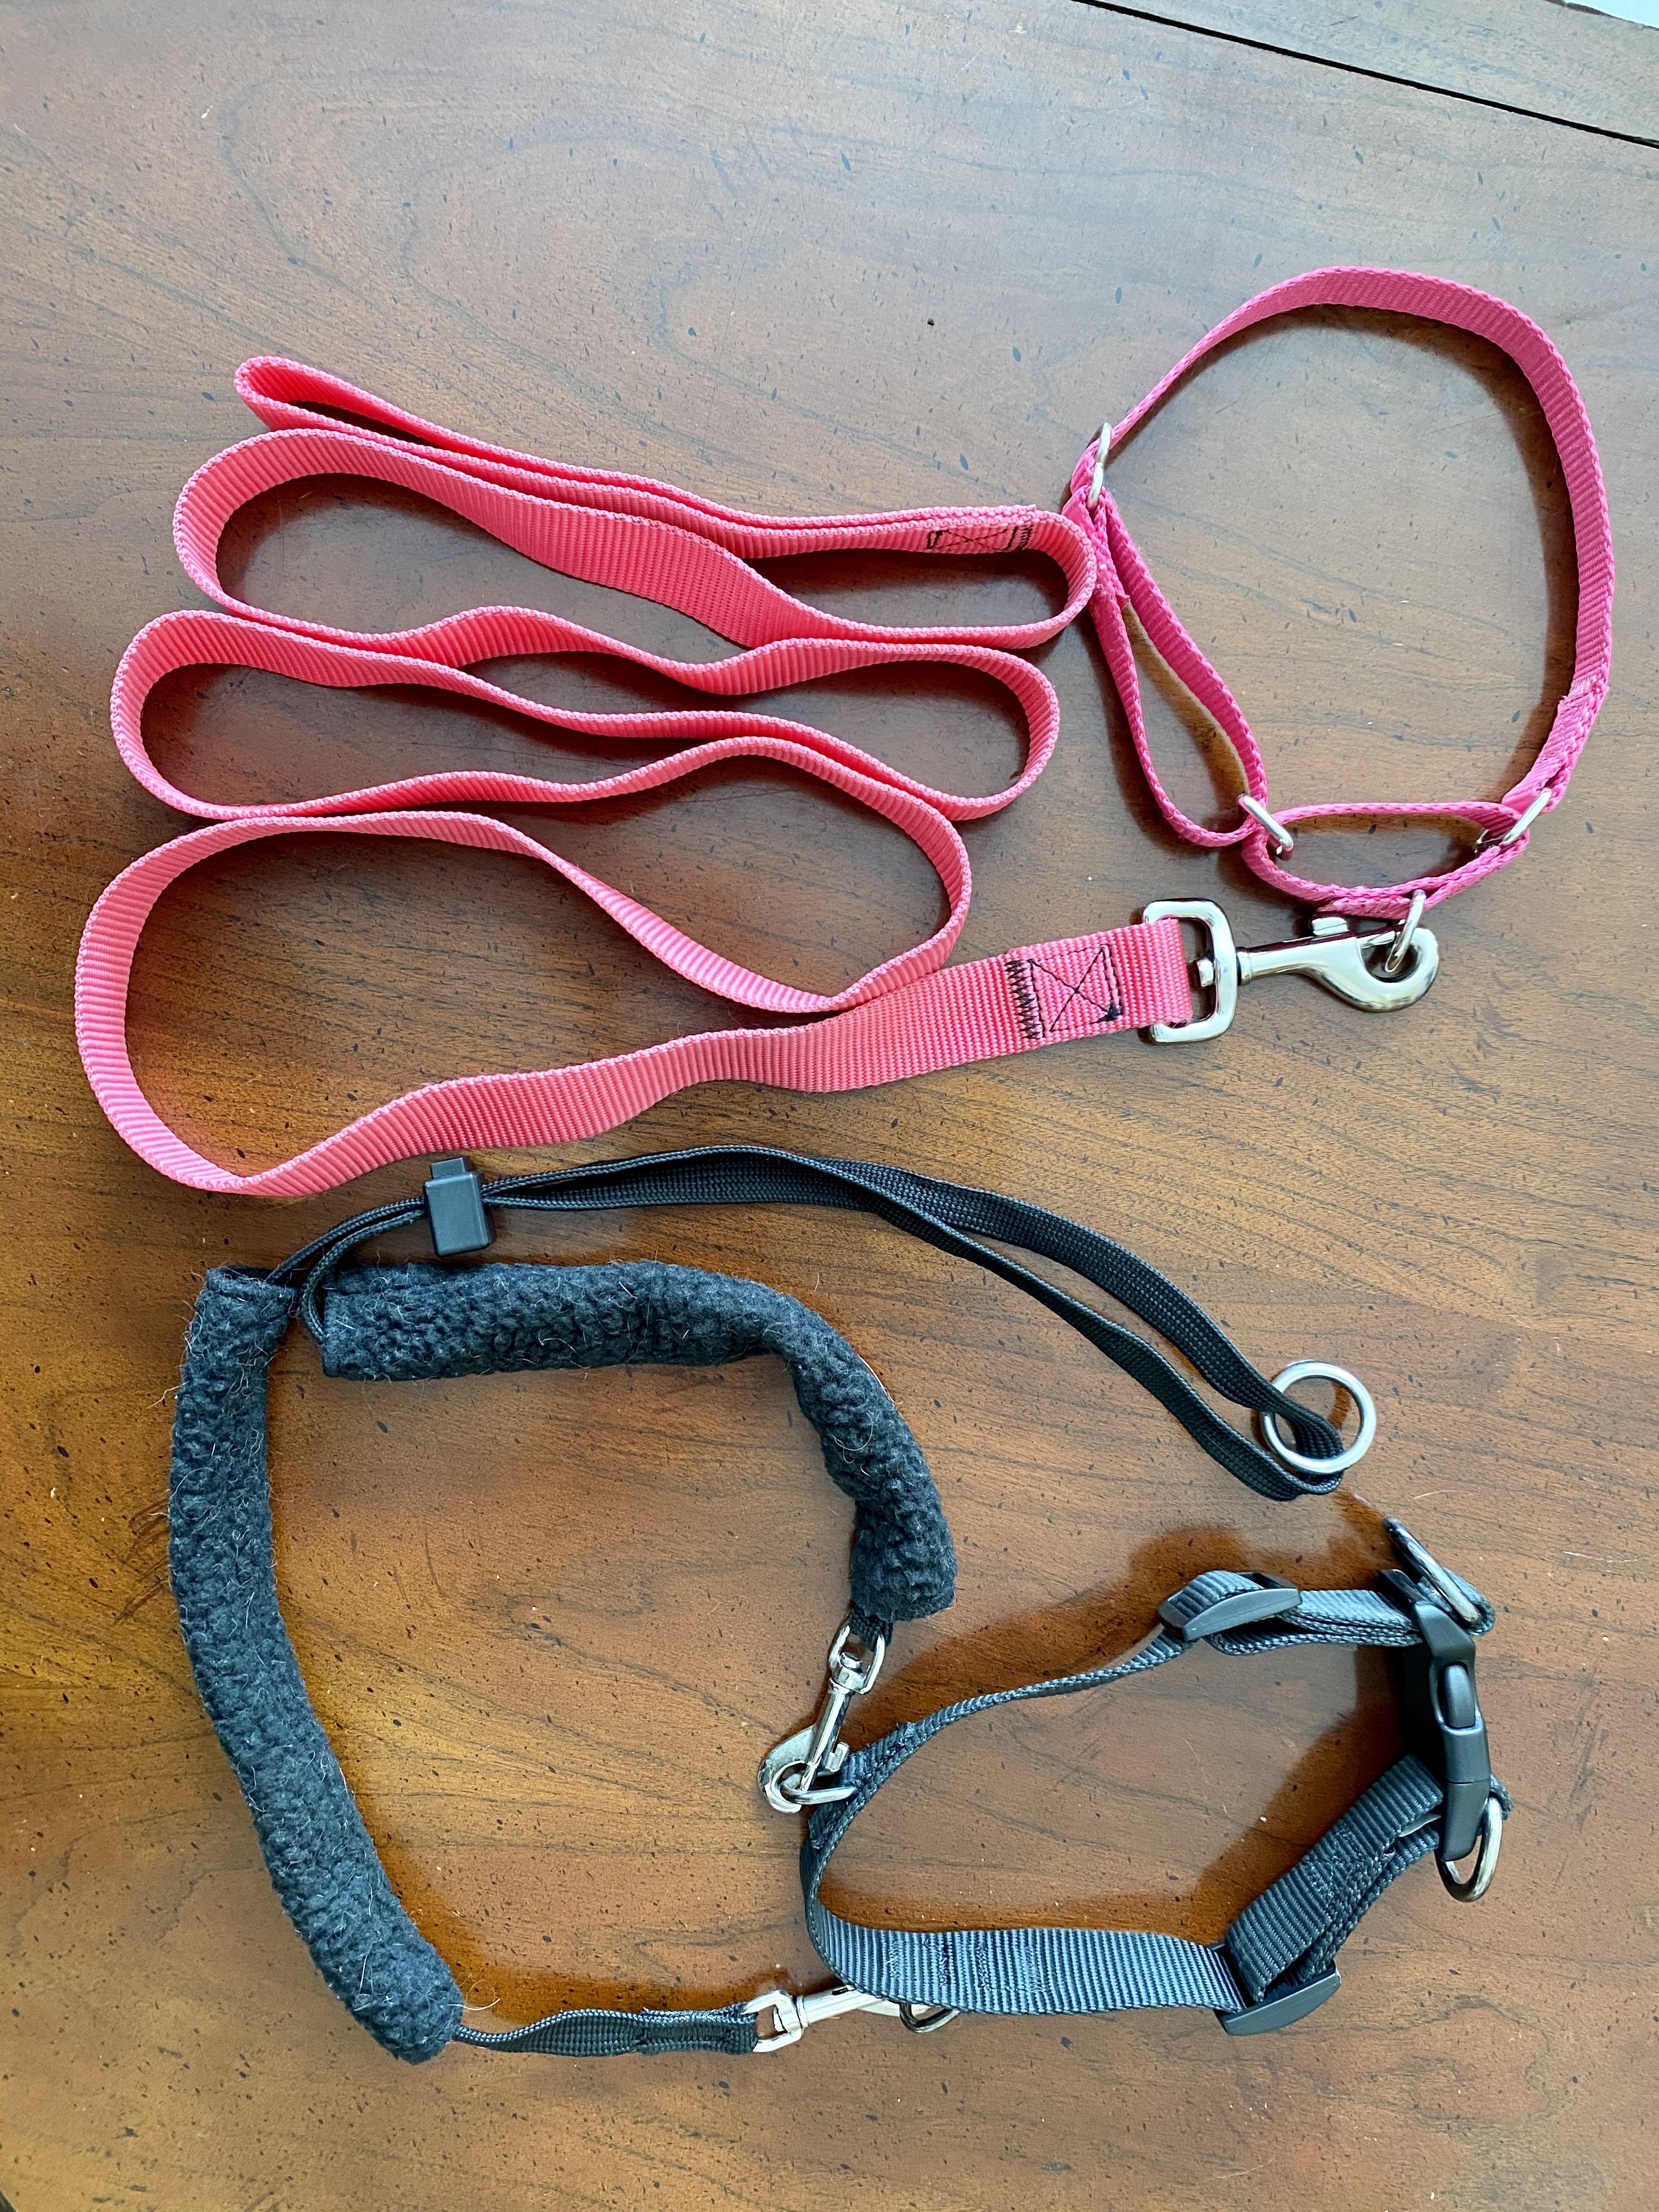 Sm/Med Dog Leash and Harness